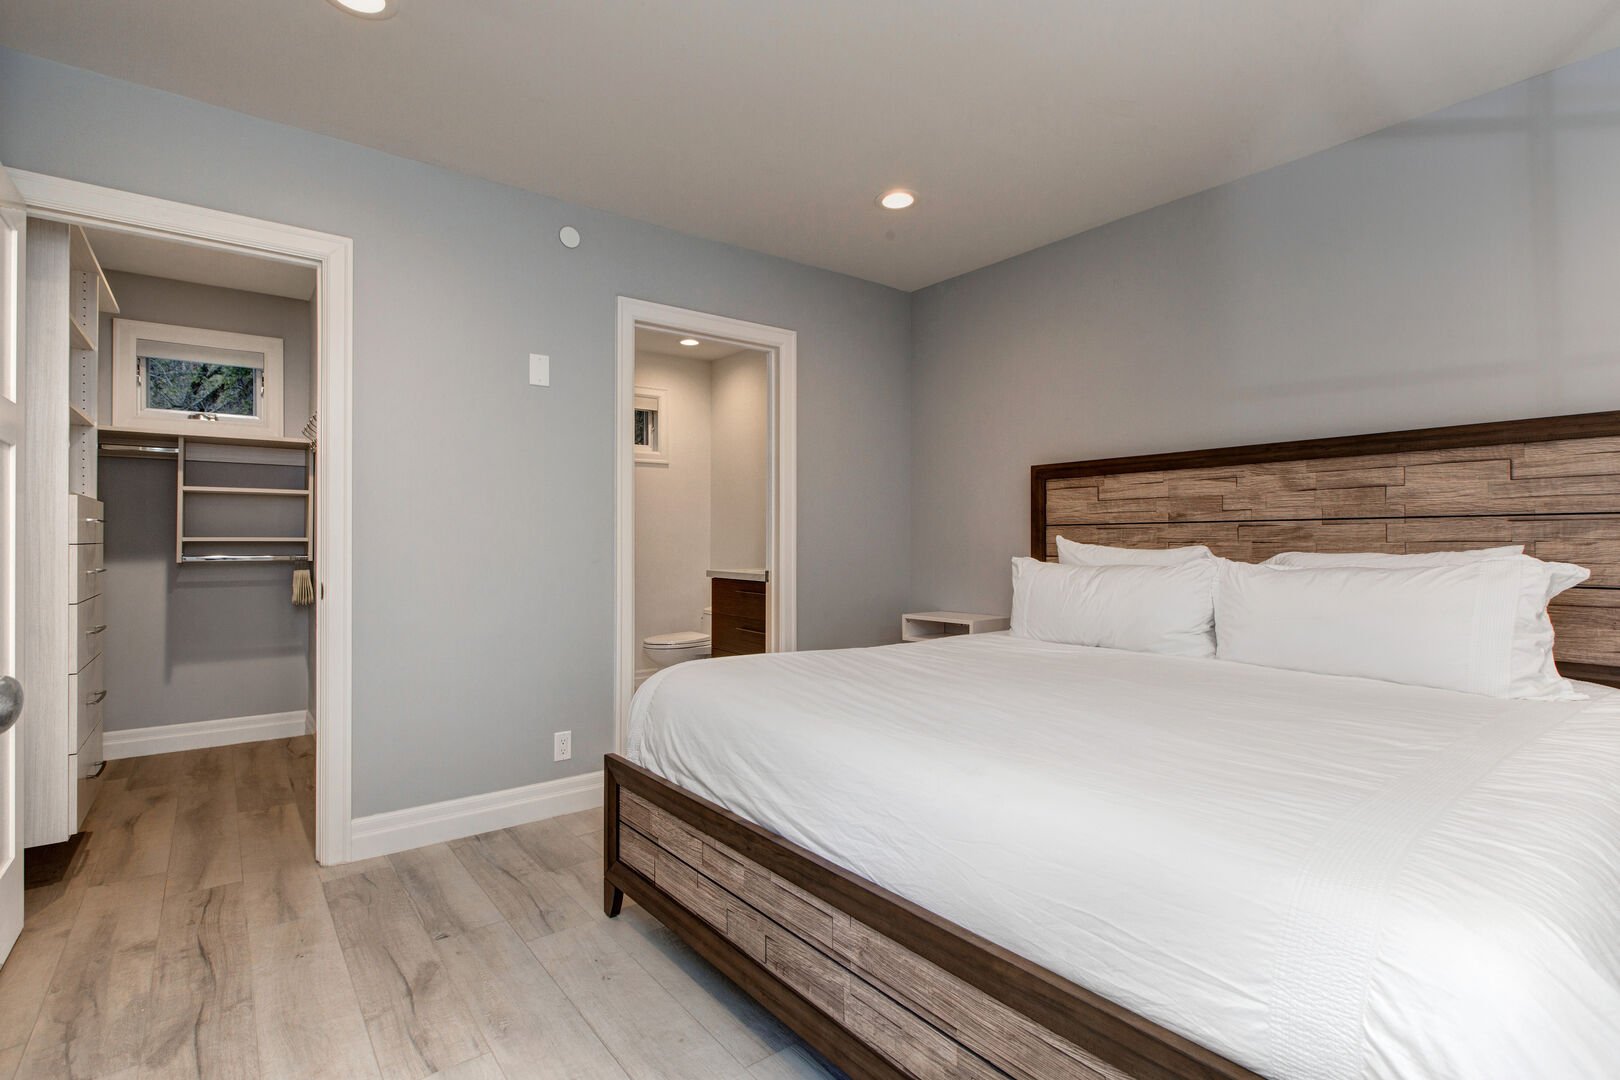 Bedroom 2 | Main Level, King Bed, Walk In Closet, Full Ensuite Bathroom with Shower/Tub Combo | Abode at First Chair